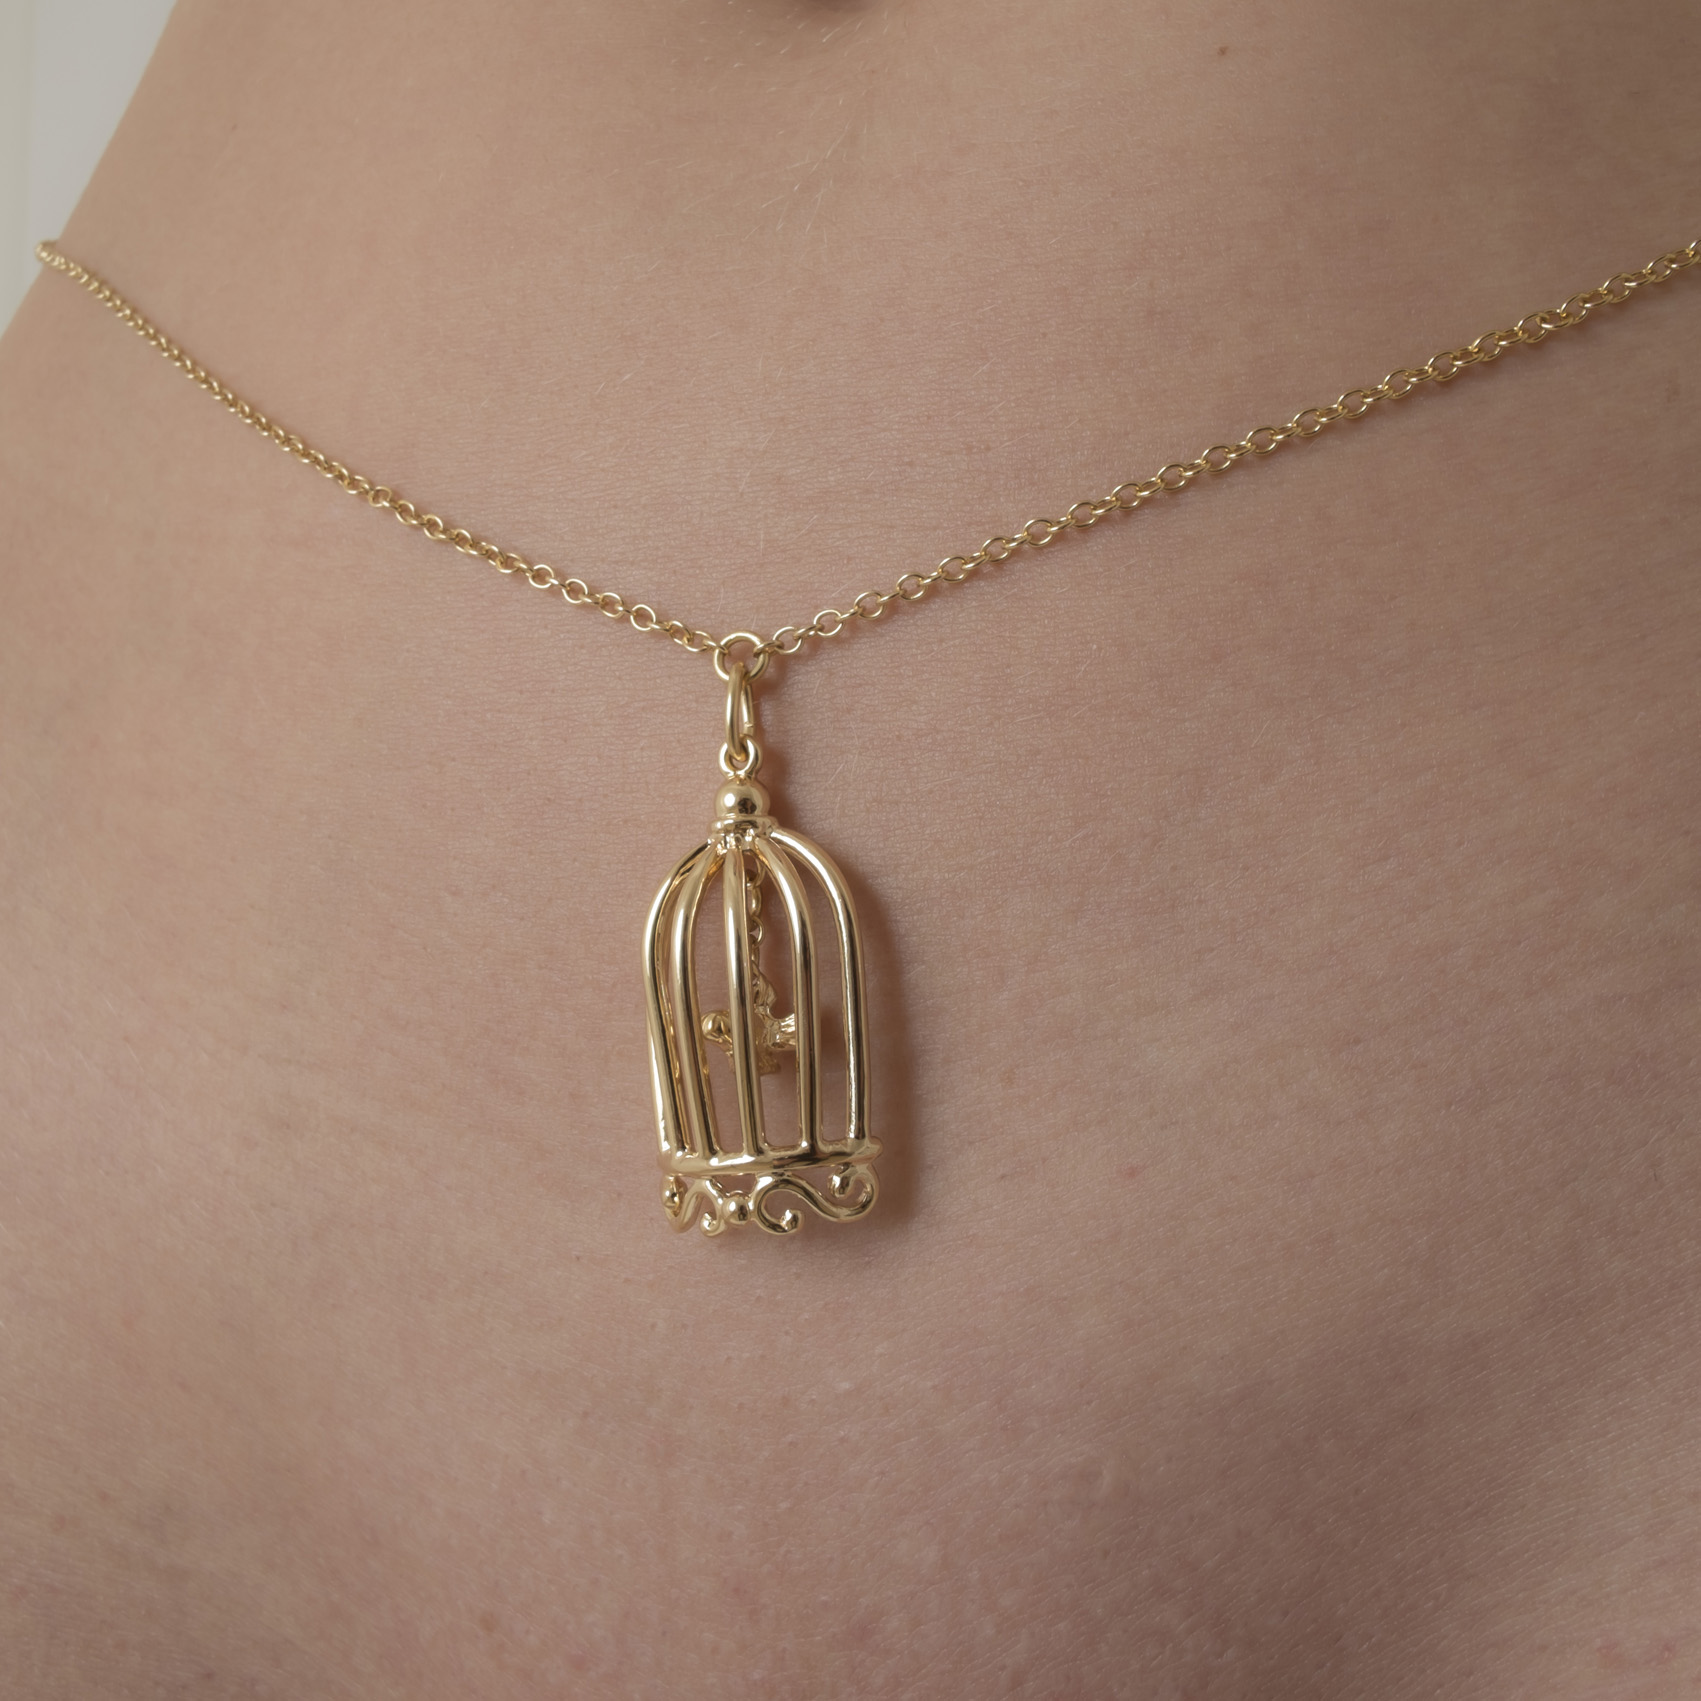 CHT124 Gold Waist Chain with Bird in a Cage Pendant